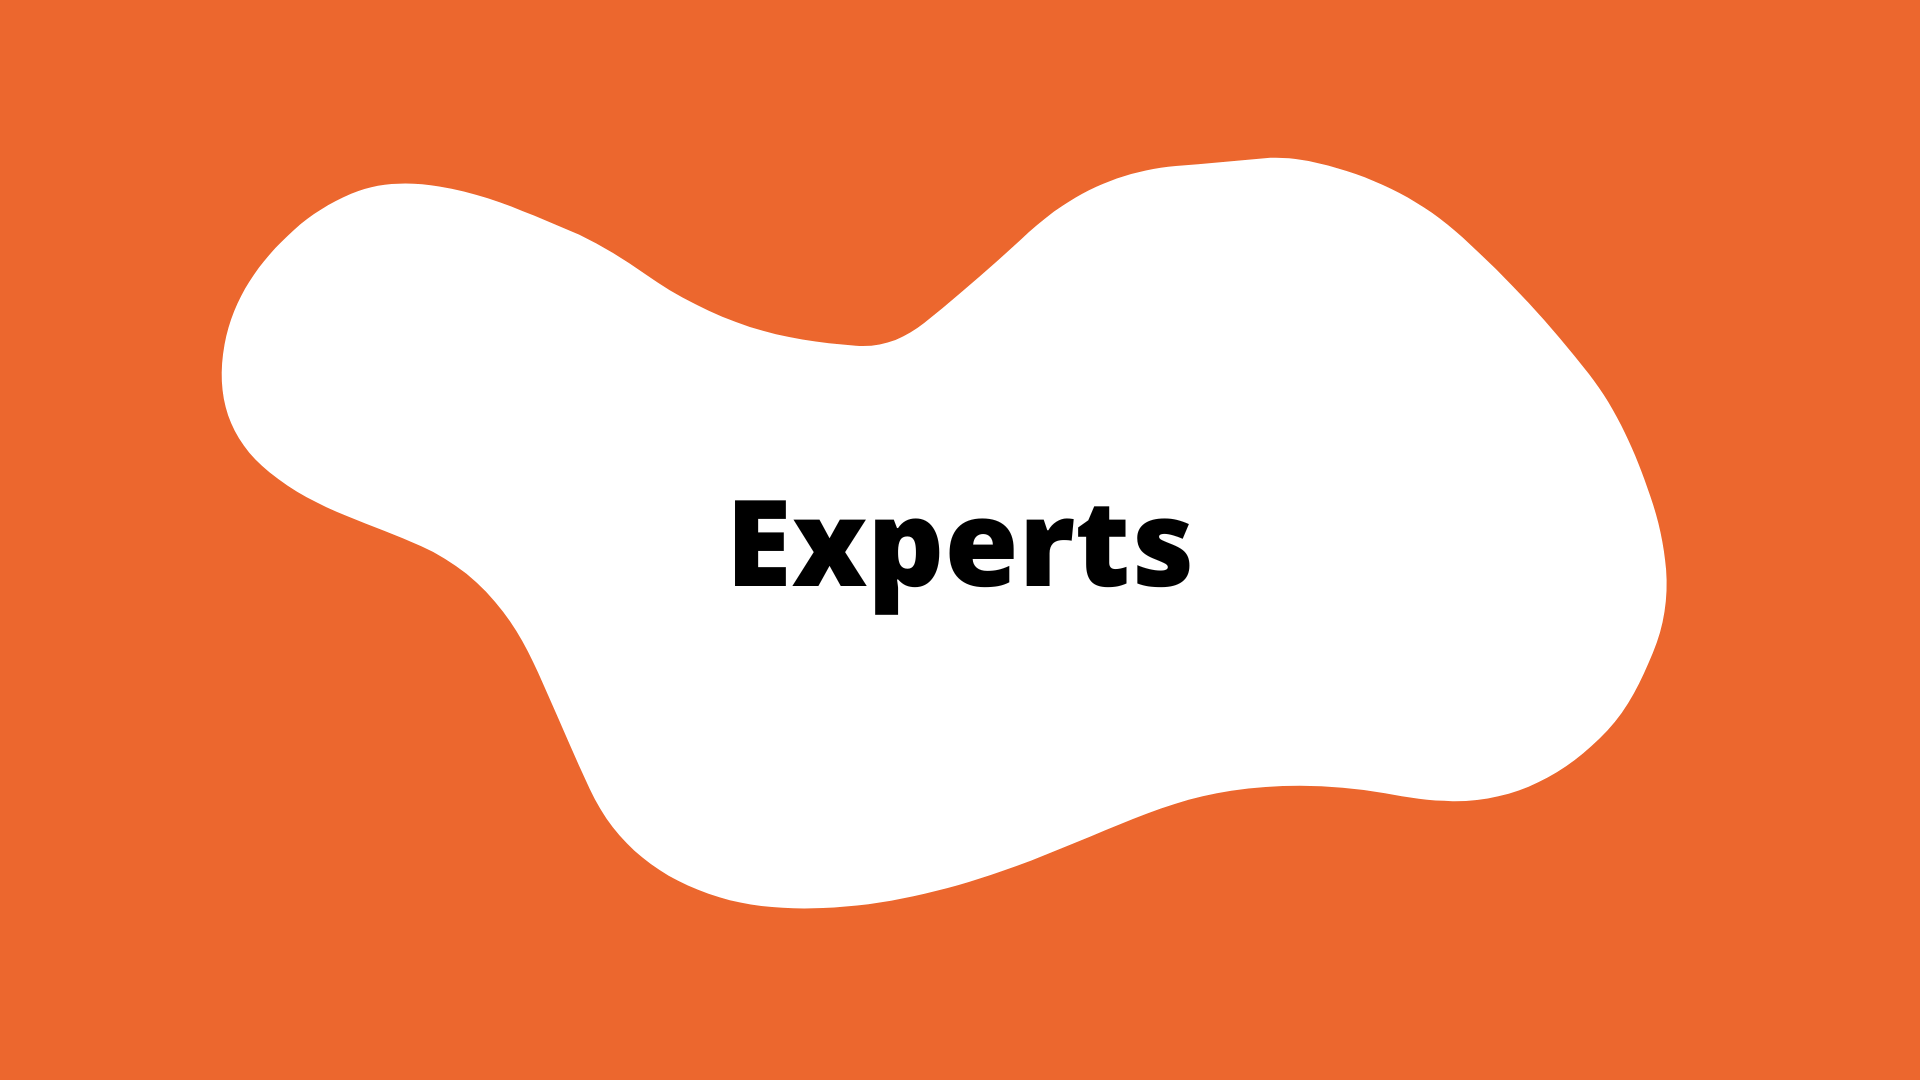 "Experts" activity button. An orange square with a white blob in the center. The title is in the blob.